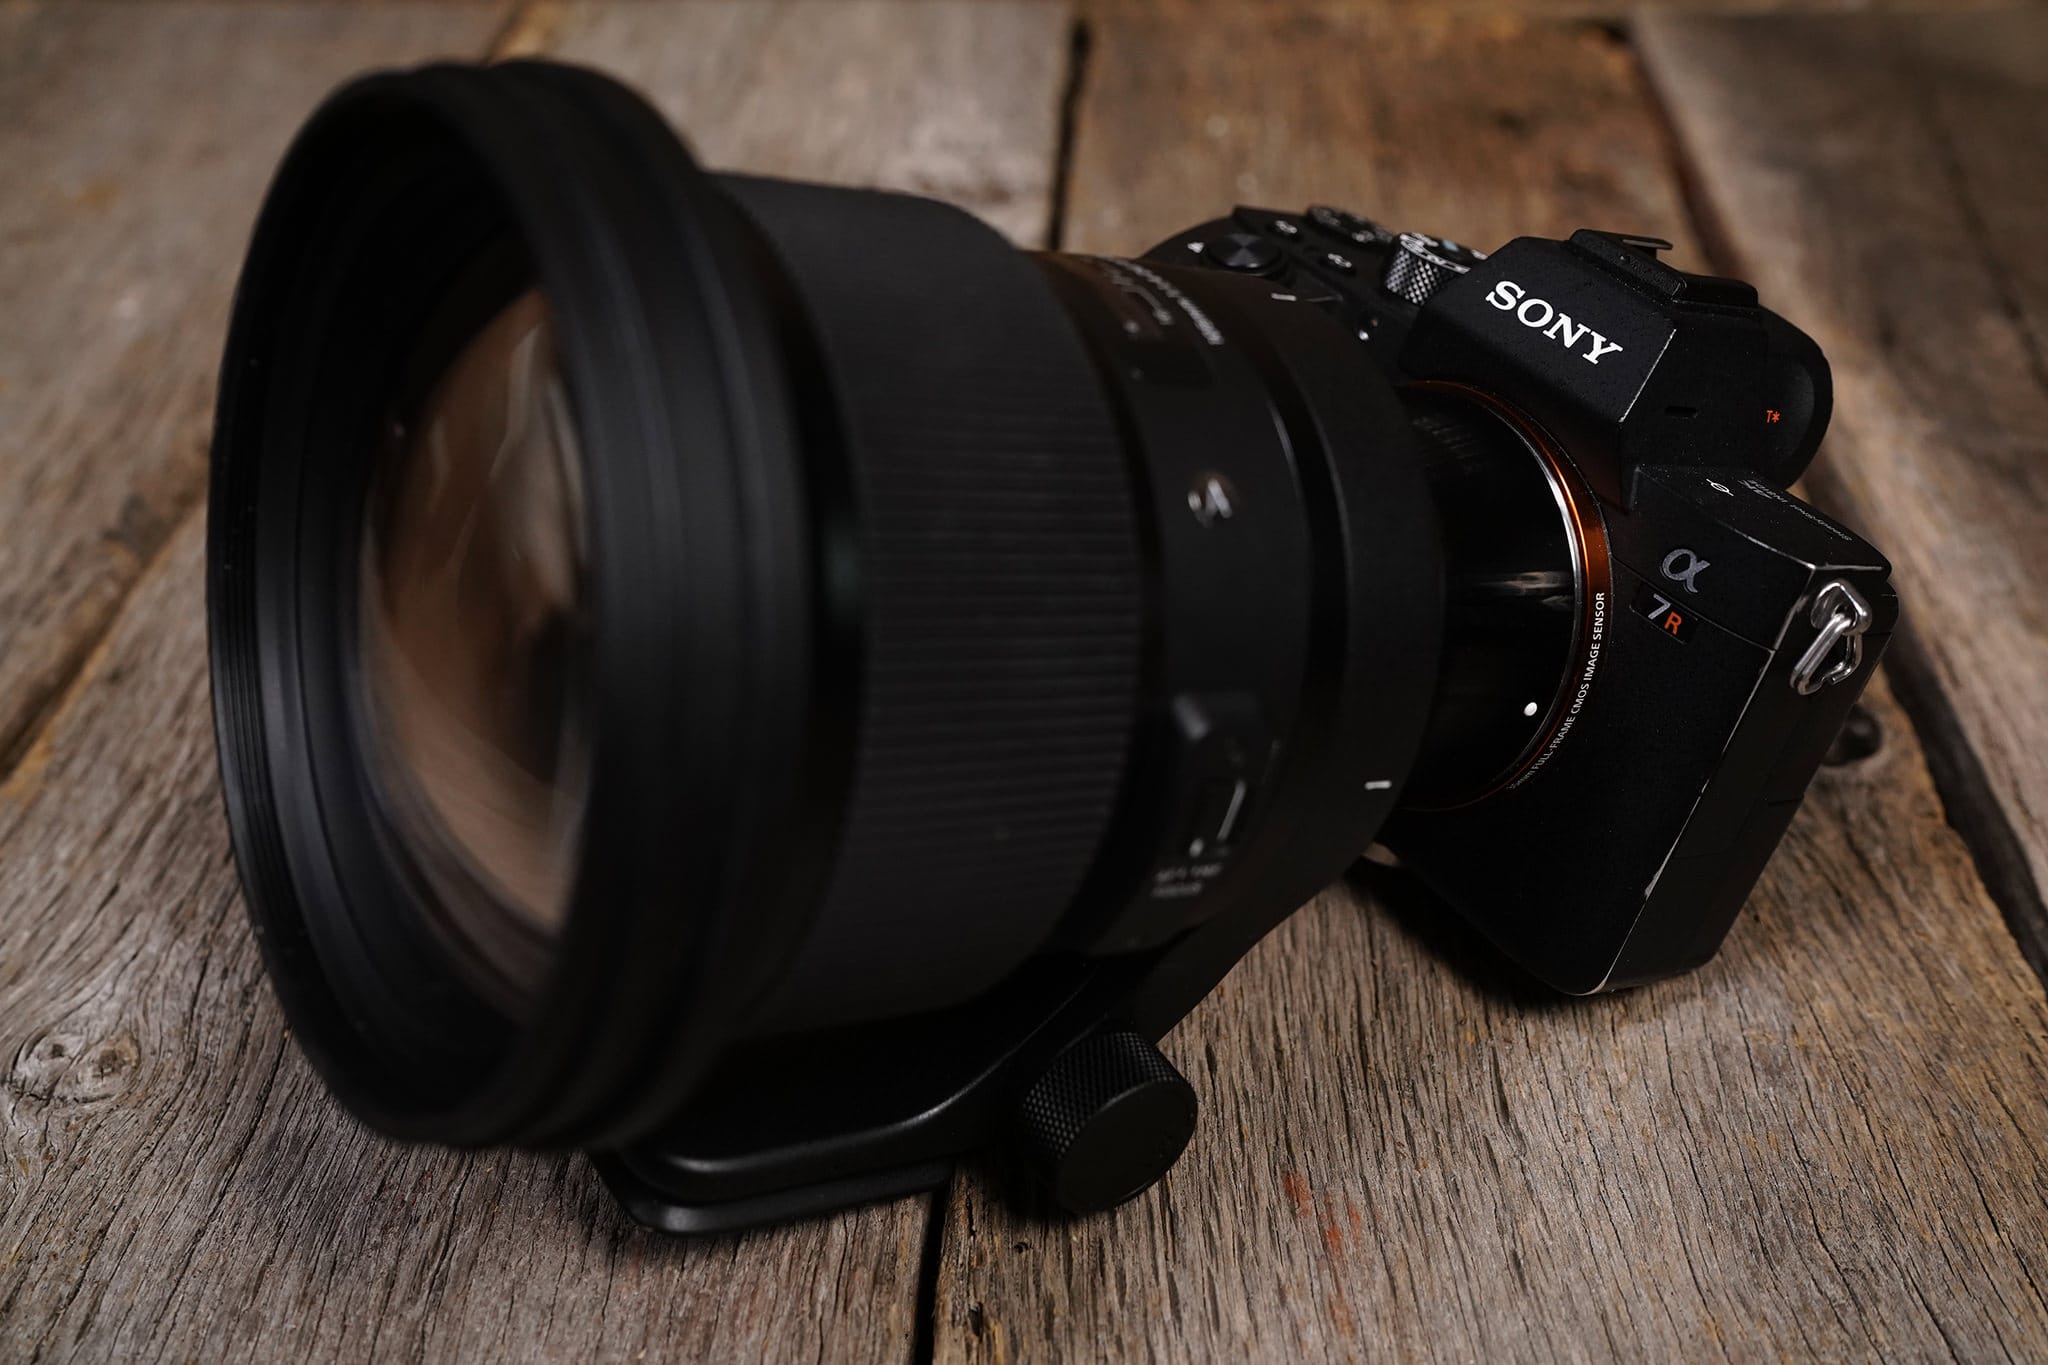 Sony A7RIII and Sigma 105 Art f/1.4 Review